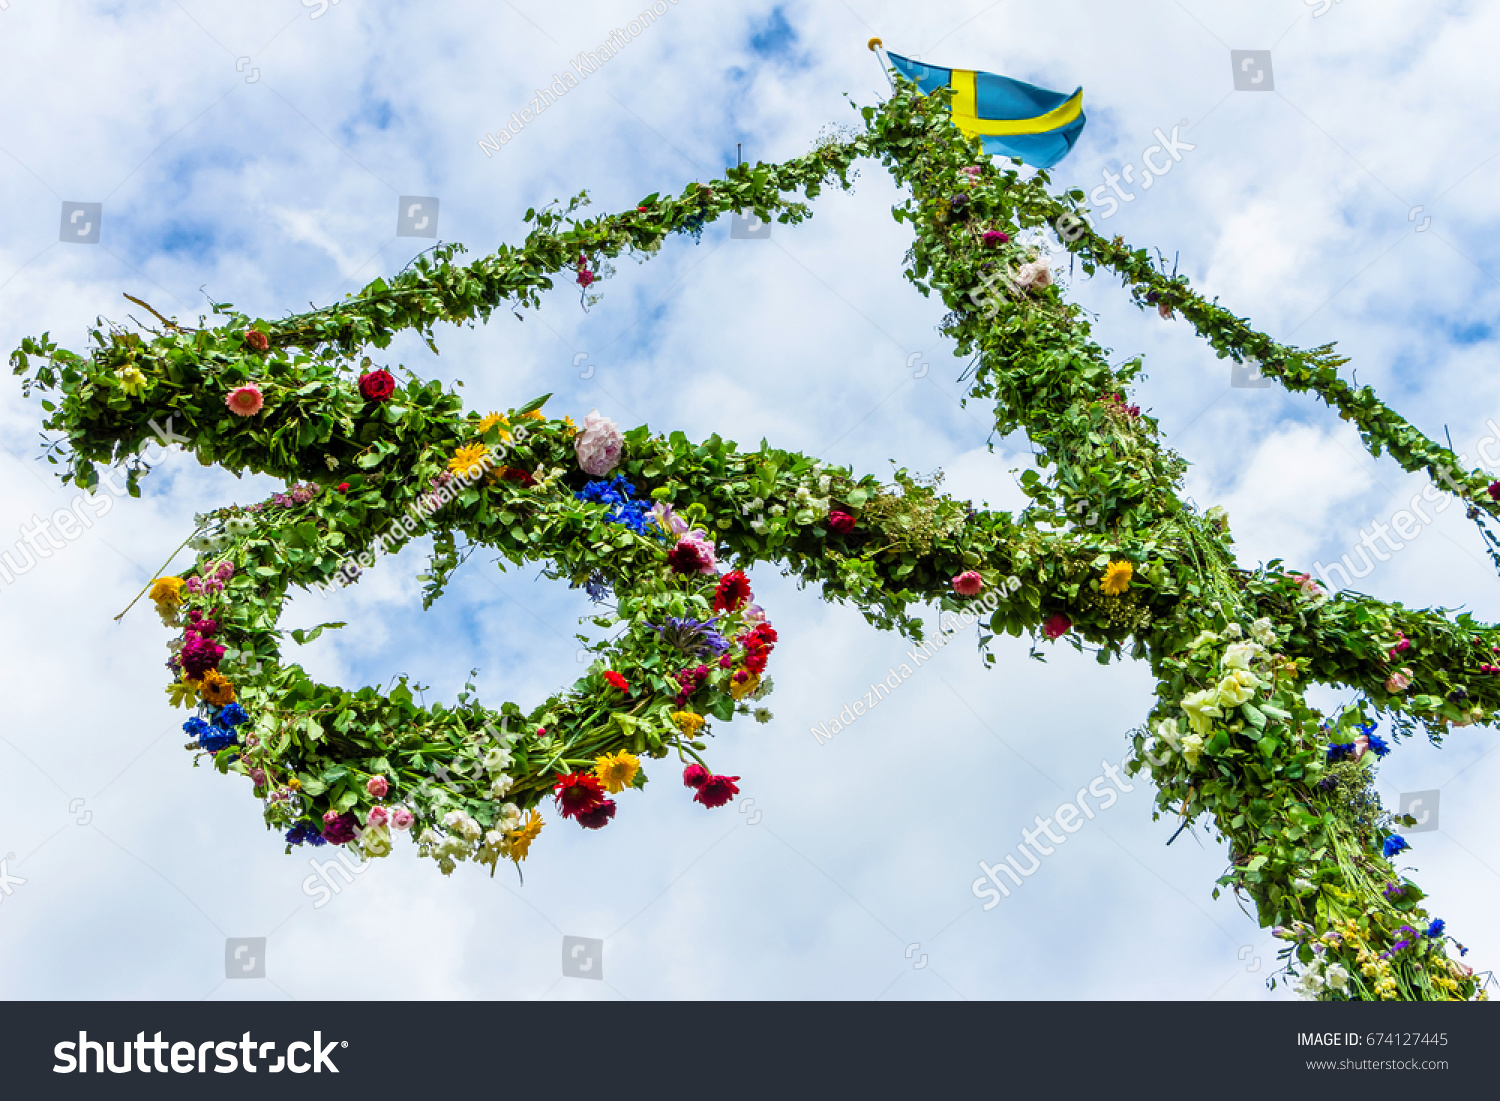 A pole and flag against blue sky and white clouds. A maypole decorated, covered in flowers and leaves.  #674127445